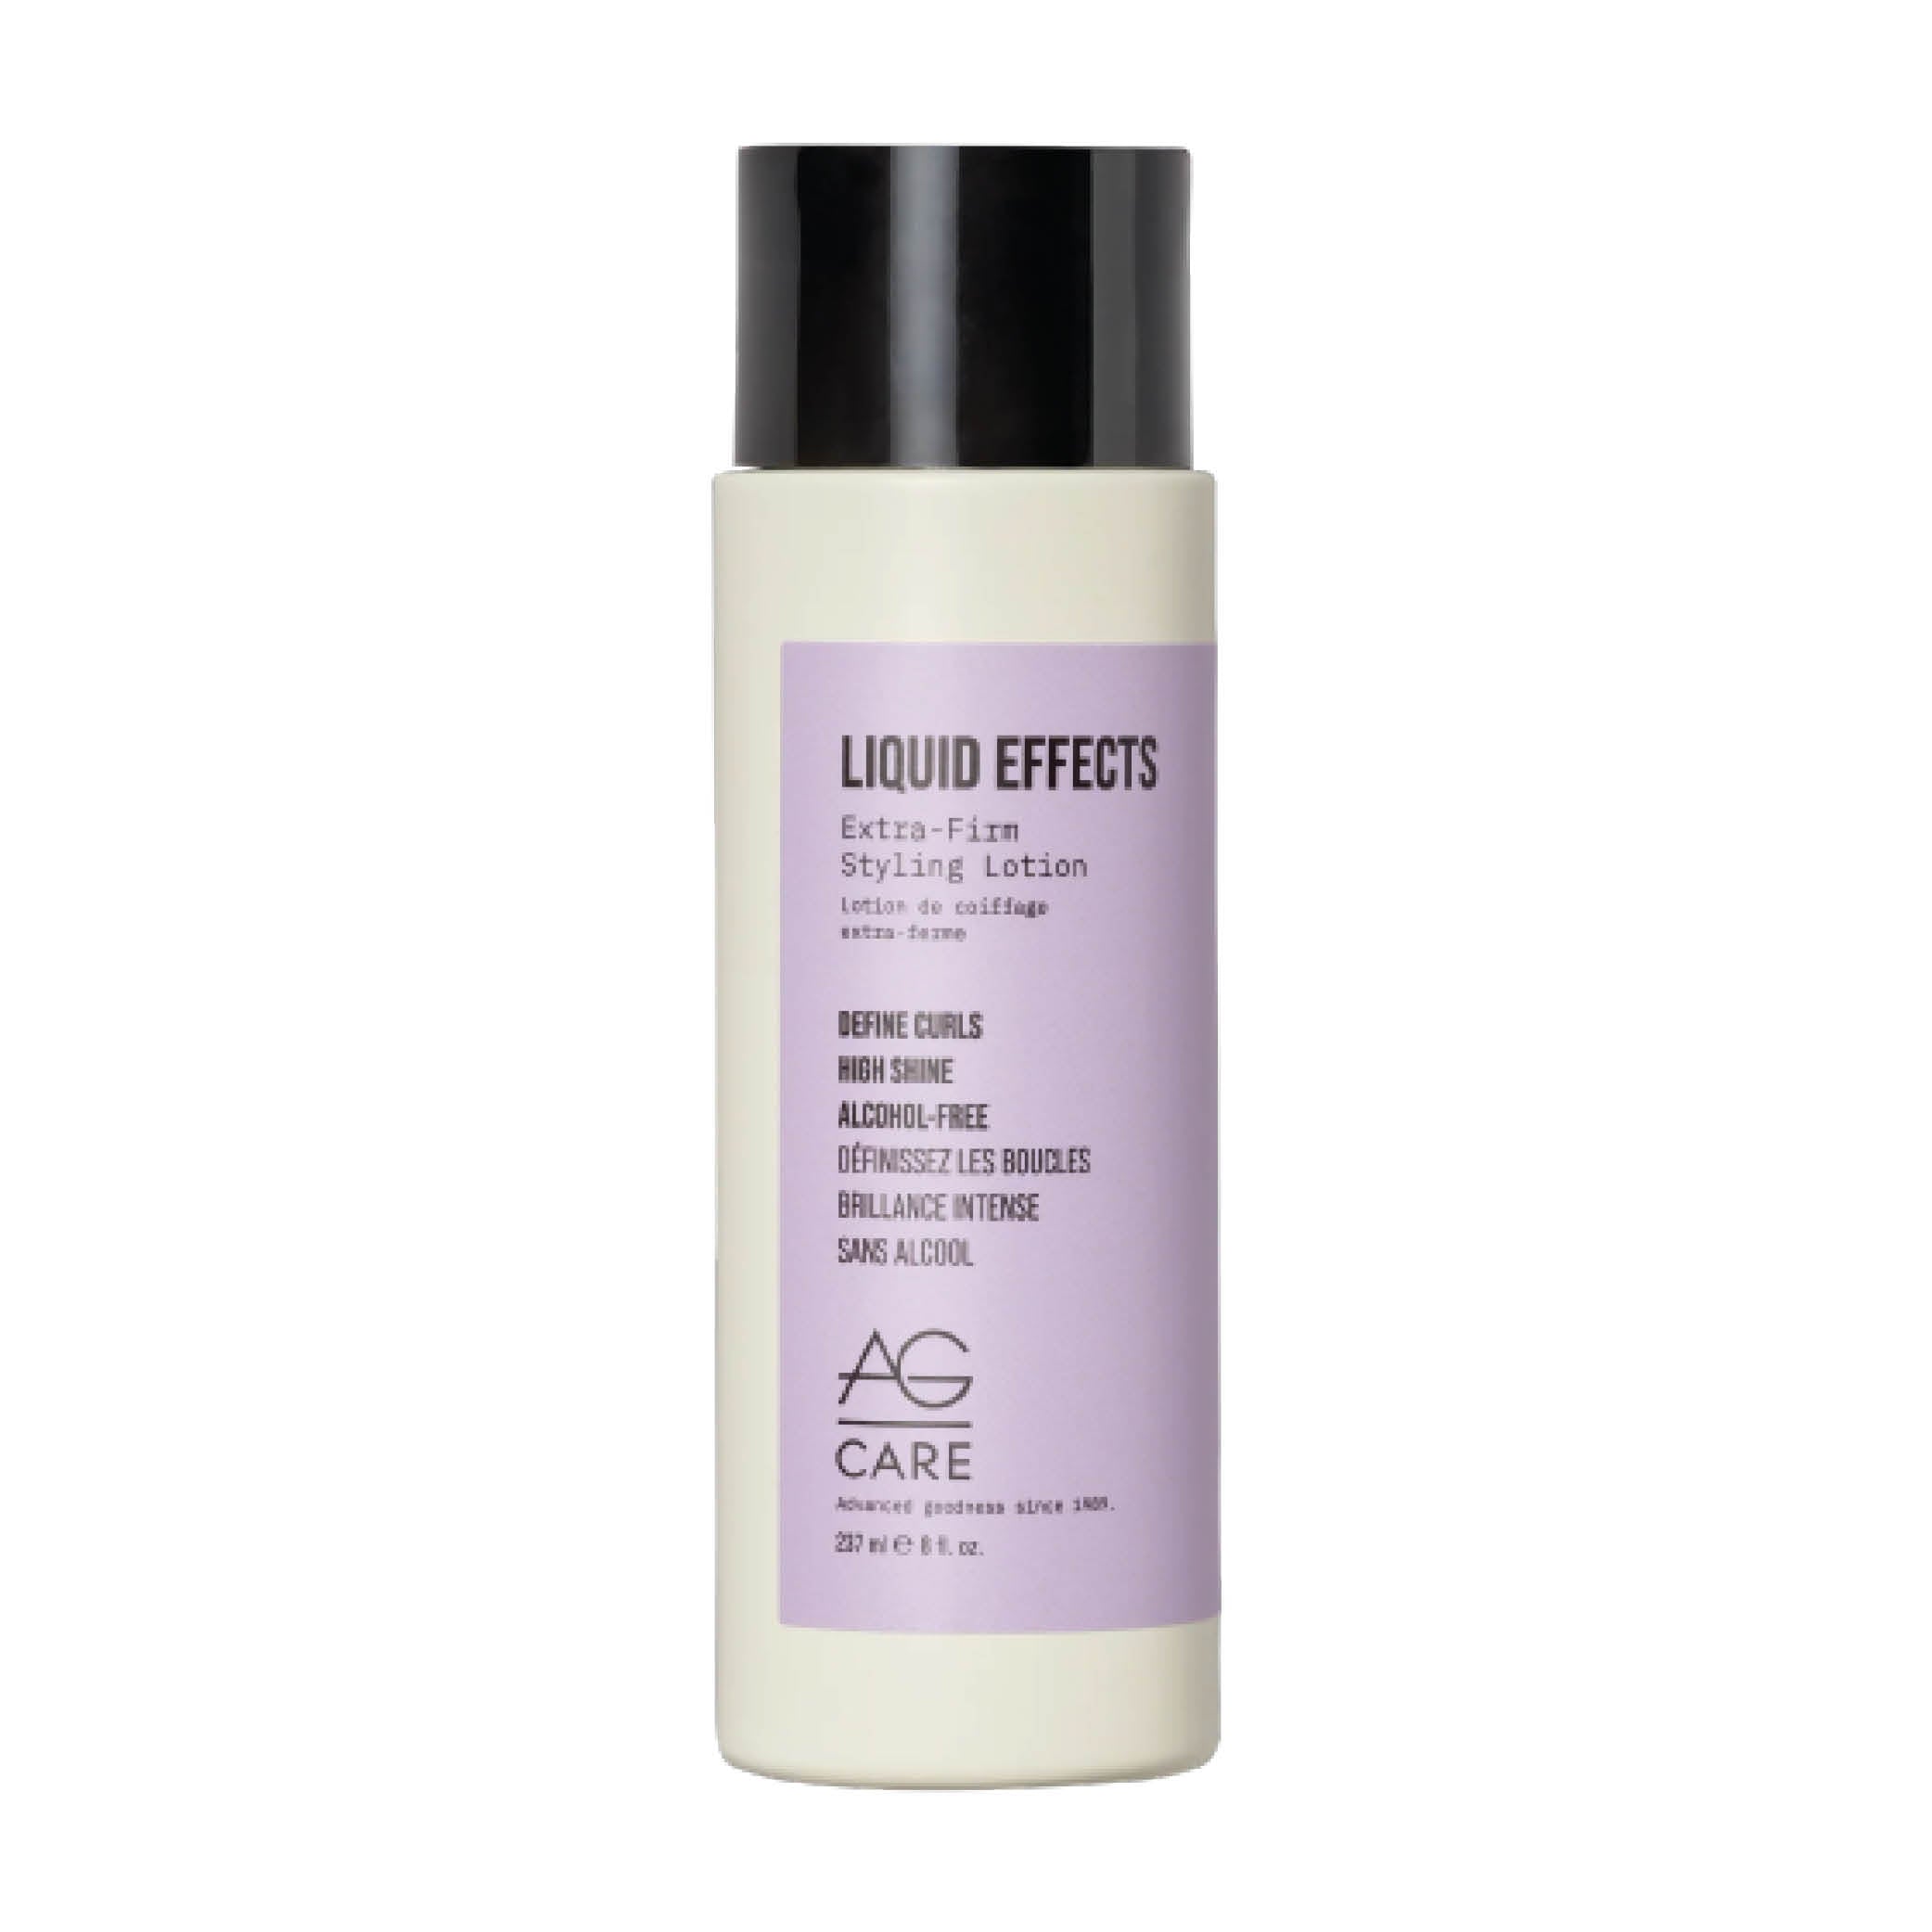 AG Hair Liquid Effects Extra-Firm Styling Lotion